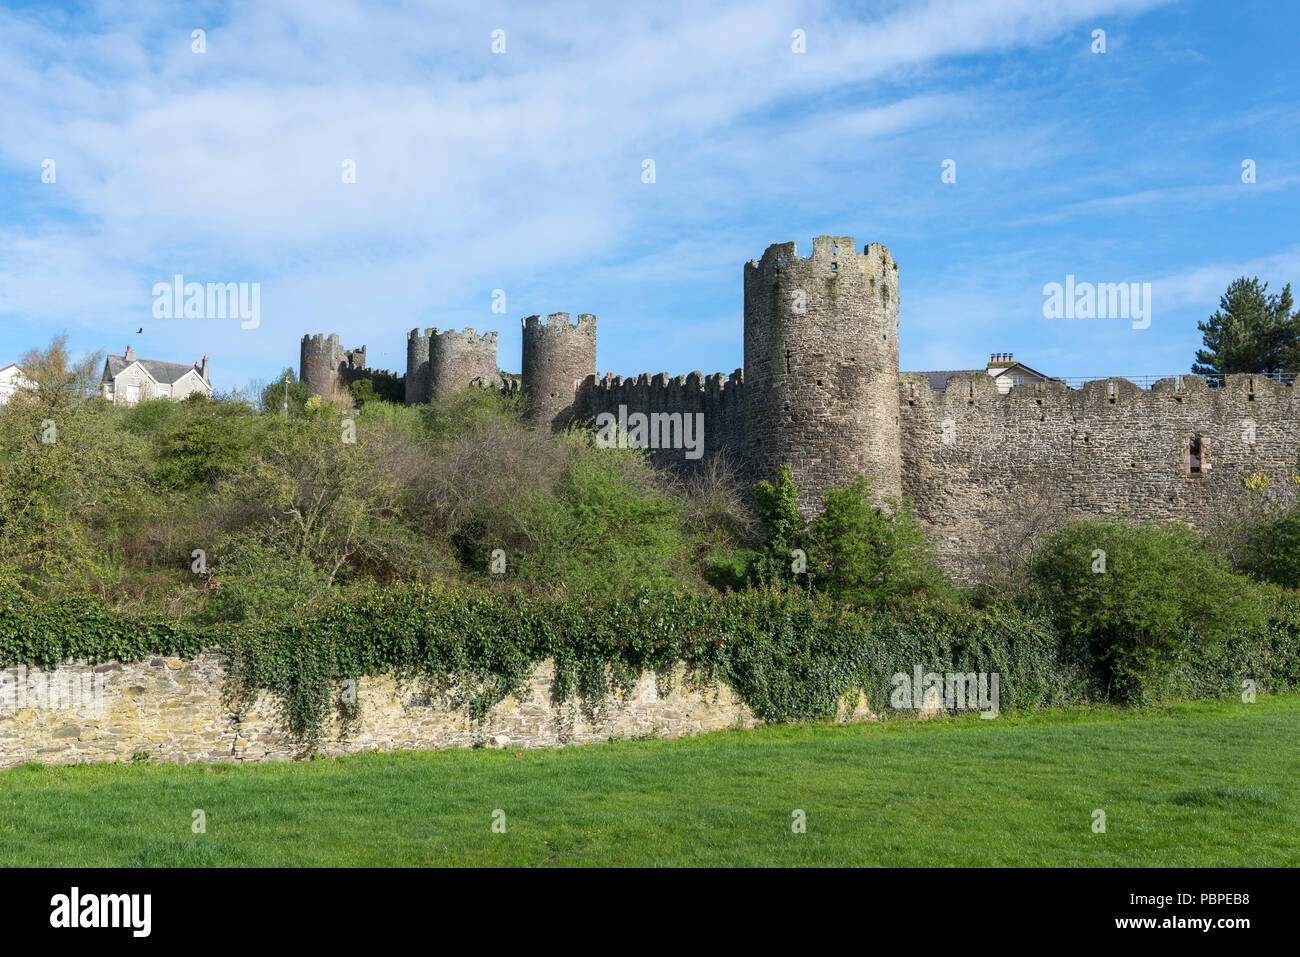 The old medieval town walls at Conwy in North Wales, UK. A sunny spring day on the outside of the town. Stock Photo